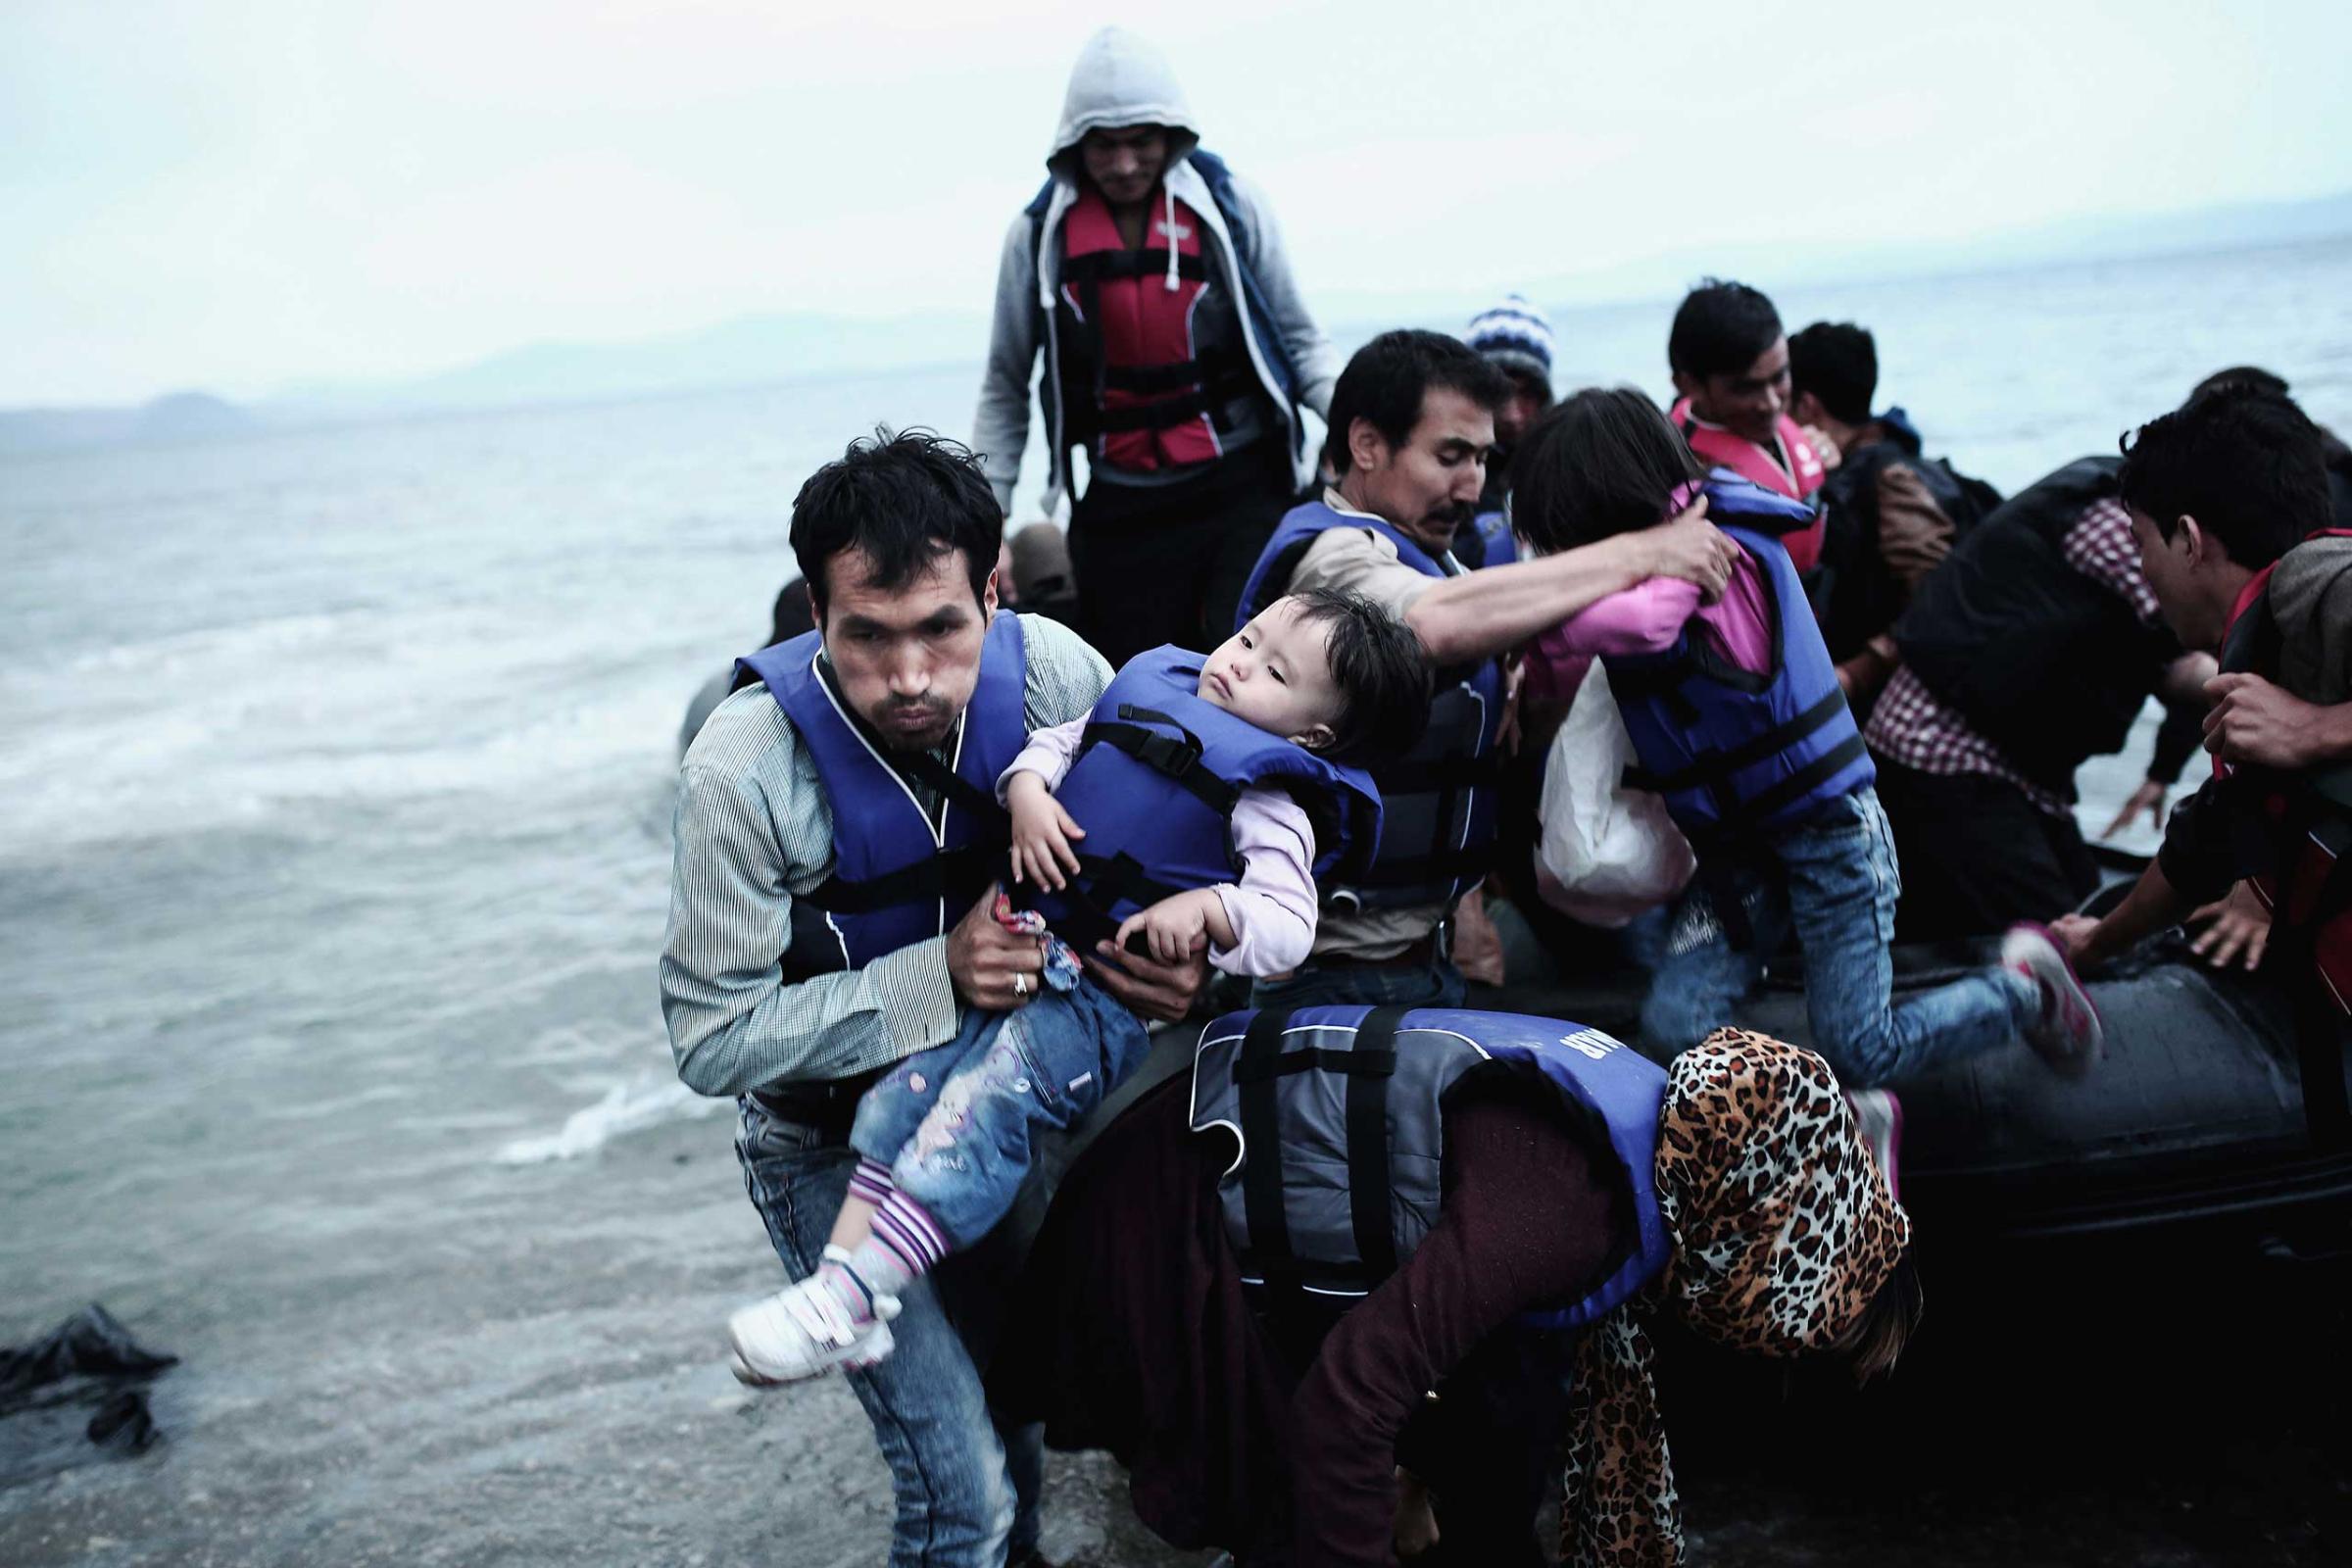 Professional Current Affairs First Place. In Search of the European Dream. Afghan migrants arrive on a beach on the Greek island of Kos, after crossing a part of the Aegean Sea between Turkey and Greece, May 27, 2015.